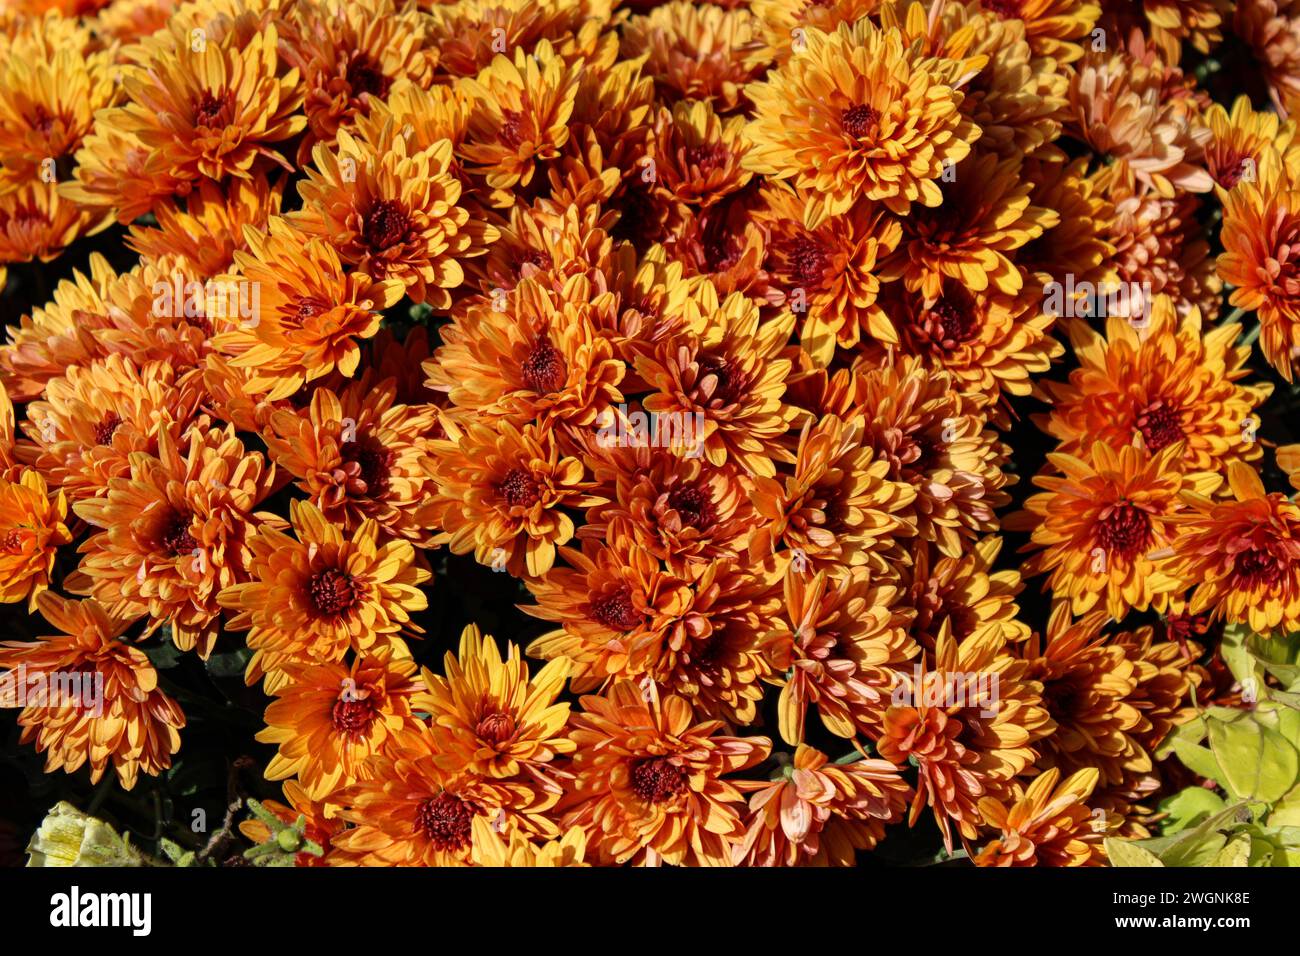 Gold chrysanthemum with orange blossoms. Cultivated plants grow in city garden and effloresce in warm weather Stock Photo